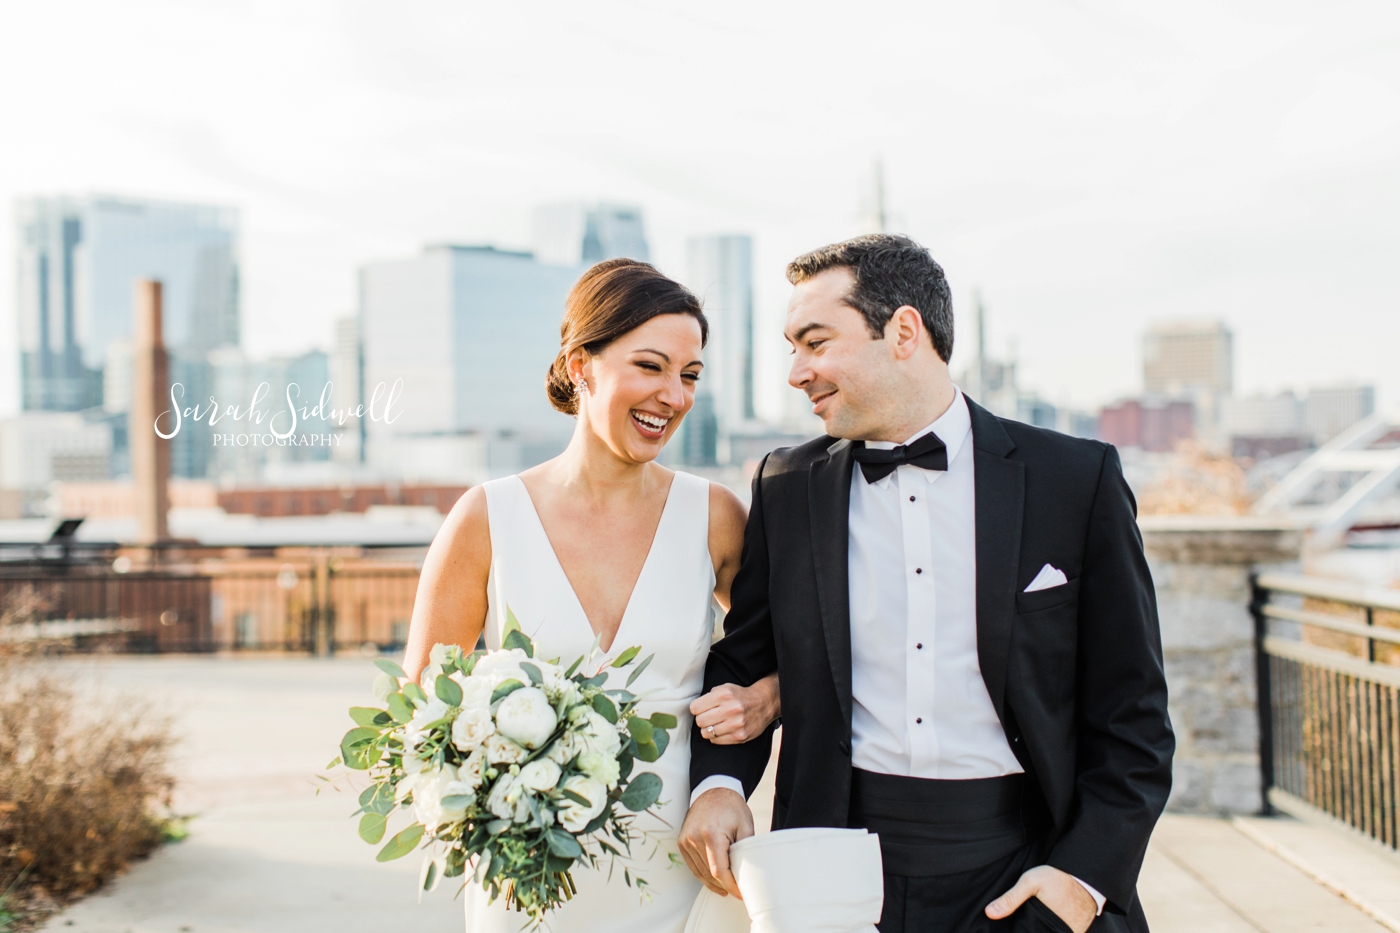 A man whispers to his new bride | Sarah Sidwell Photography | The Bell Tower